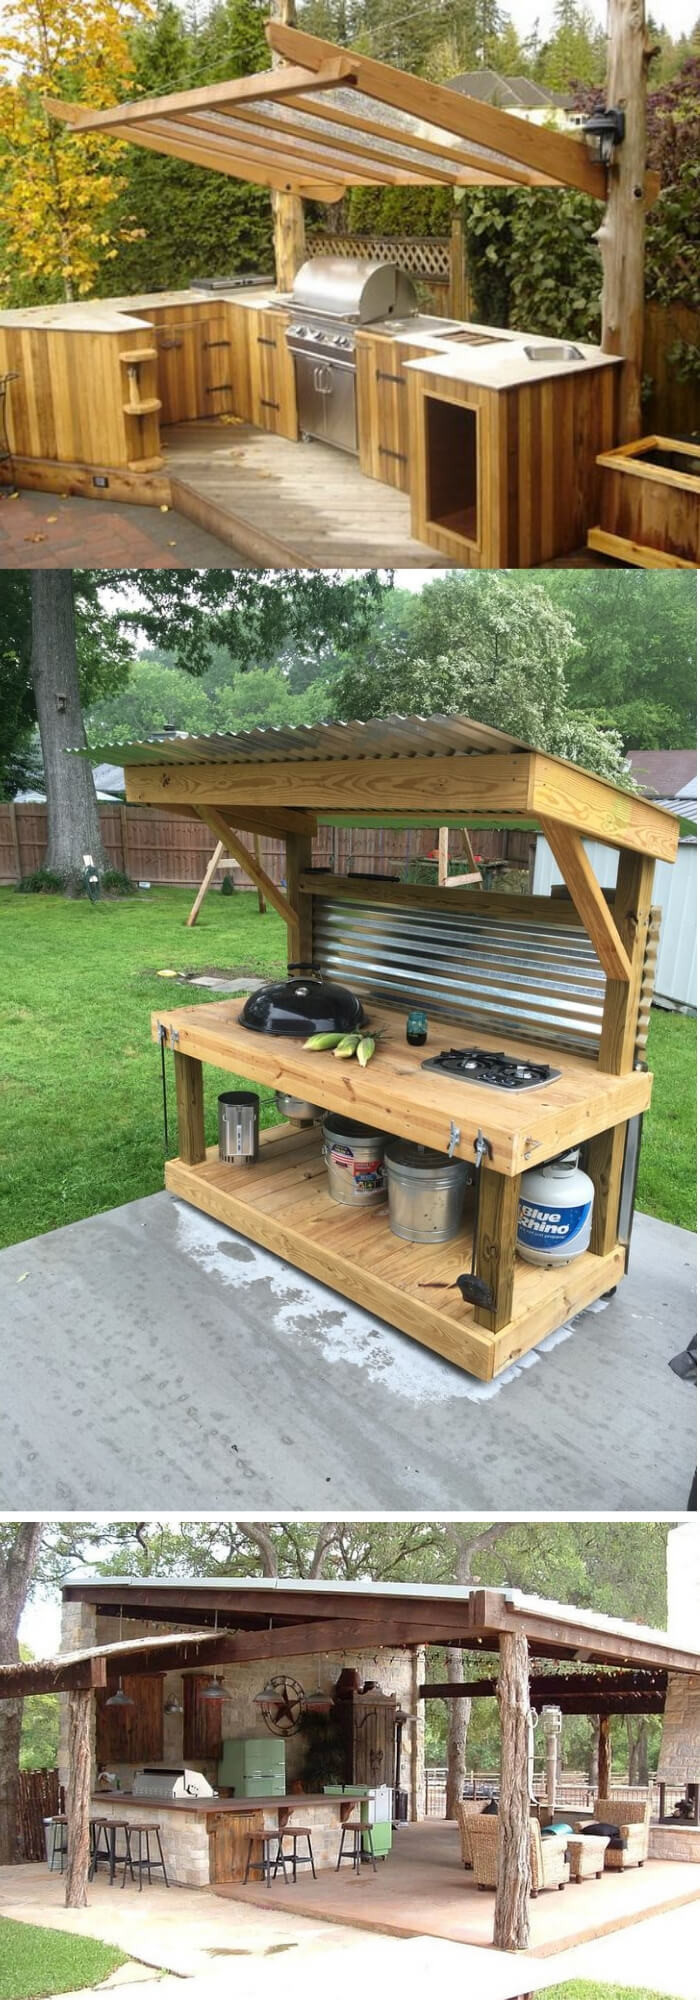 DIY Outdoor Cabinets
 31 Stunning Outdoor Kitchen Ideas & Designs With